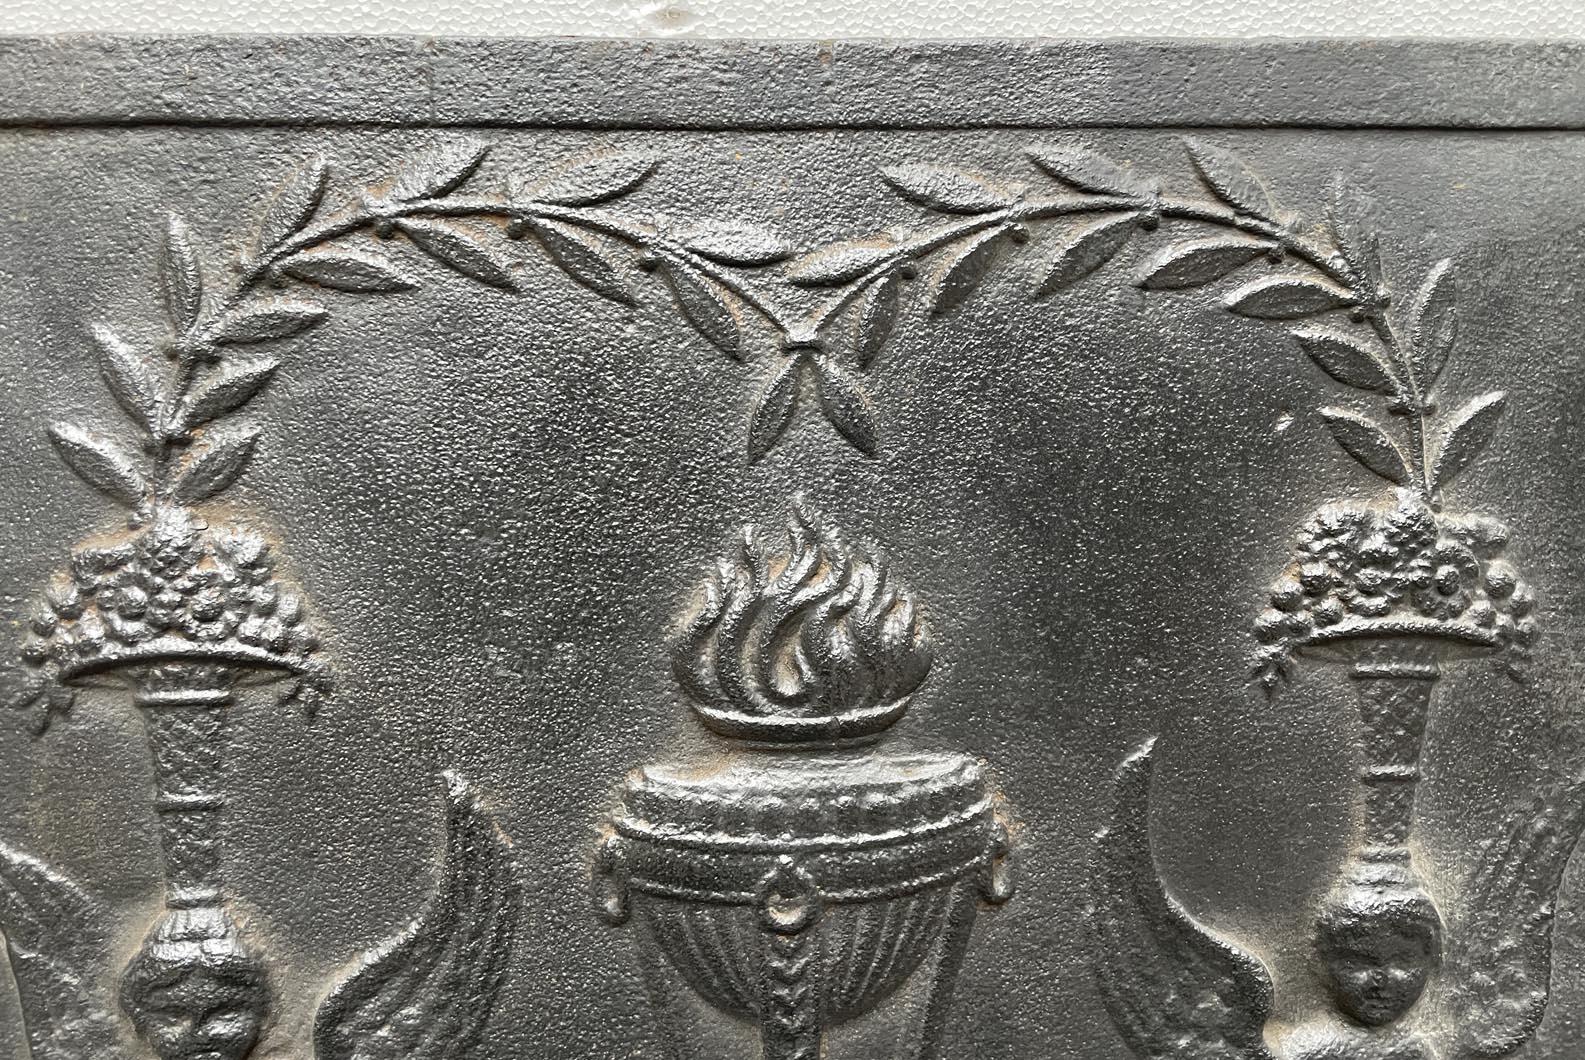 Fireback from the end of the 18th century with a vase of flames framed by sphinges.